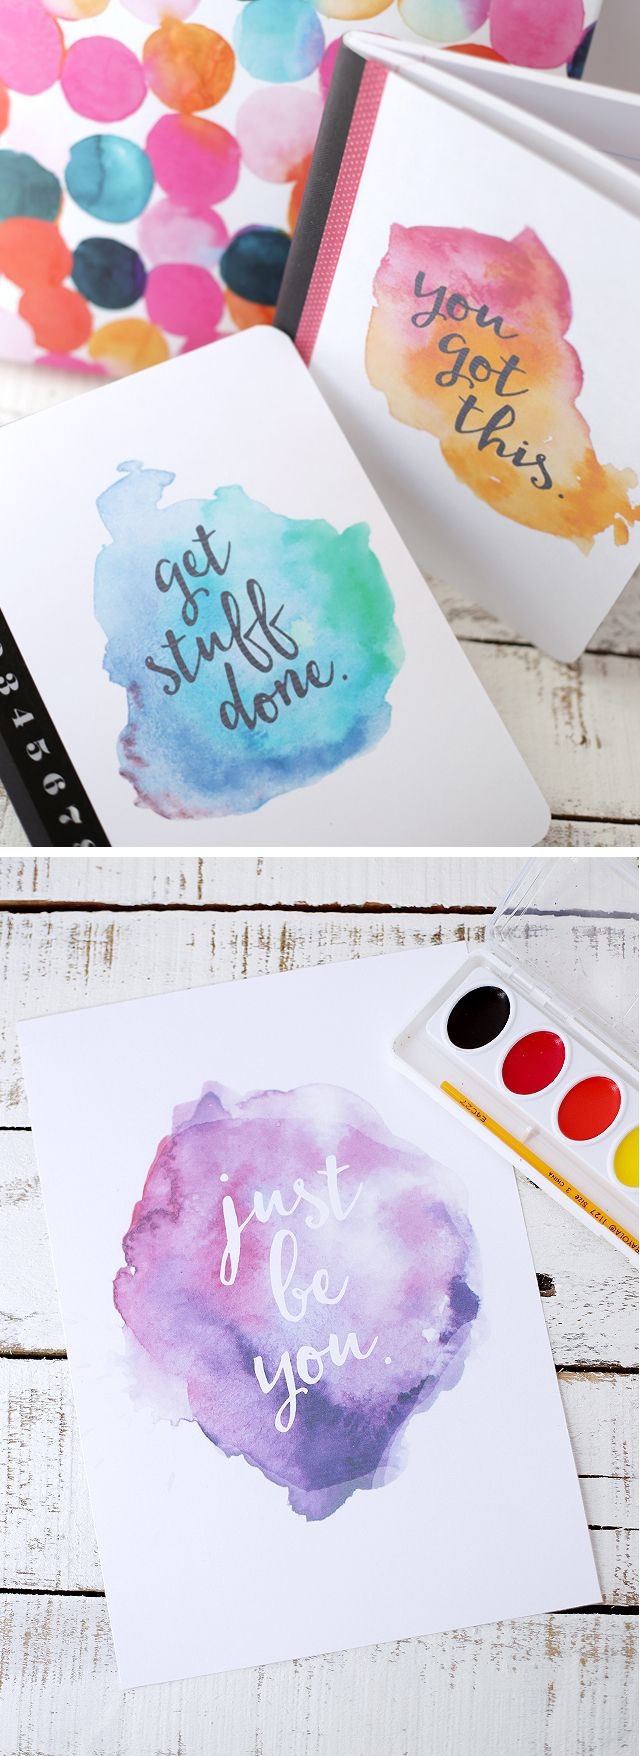 Free Printable Watercolor Notebook Covers | Making Art | Aquarel - Free Printable Watercolor Notebook Covers